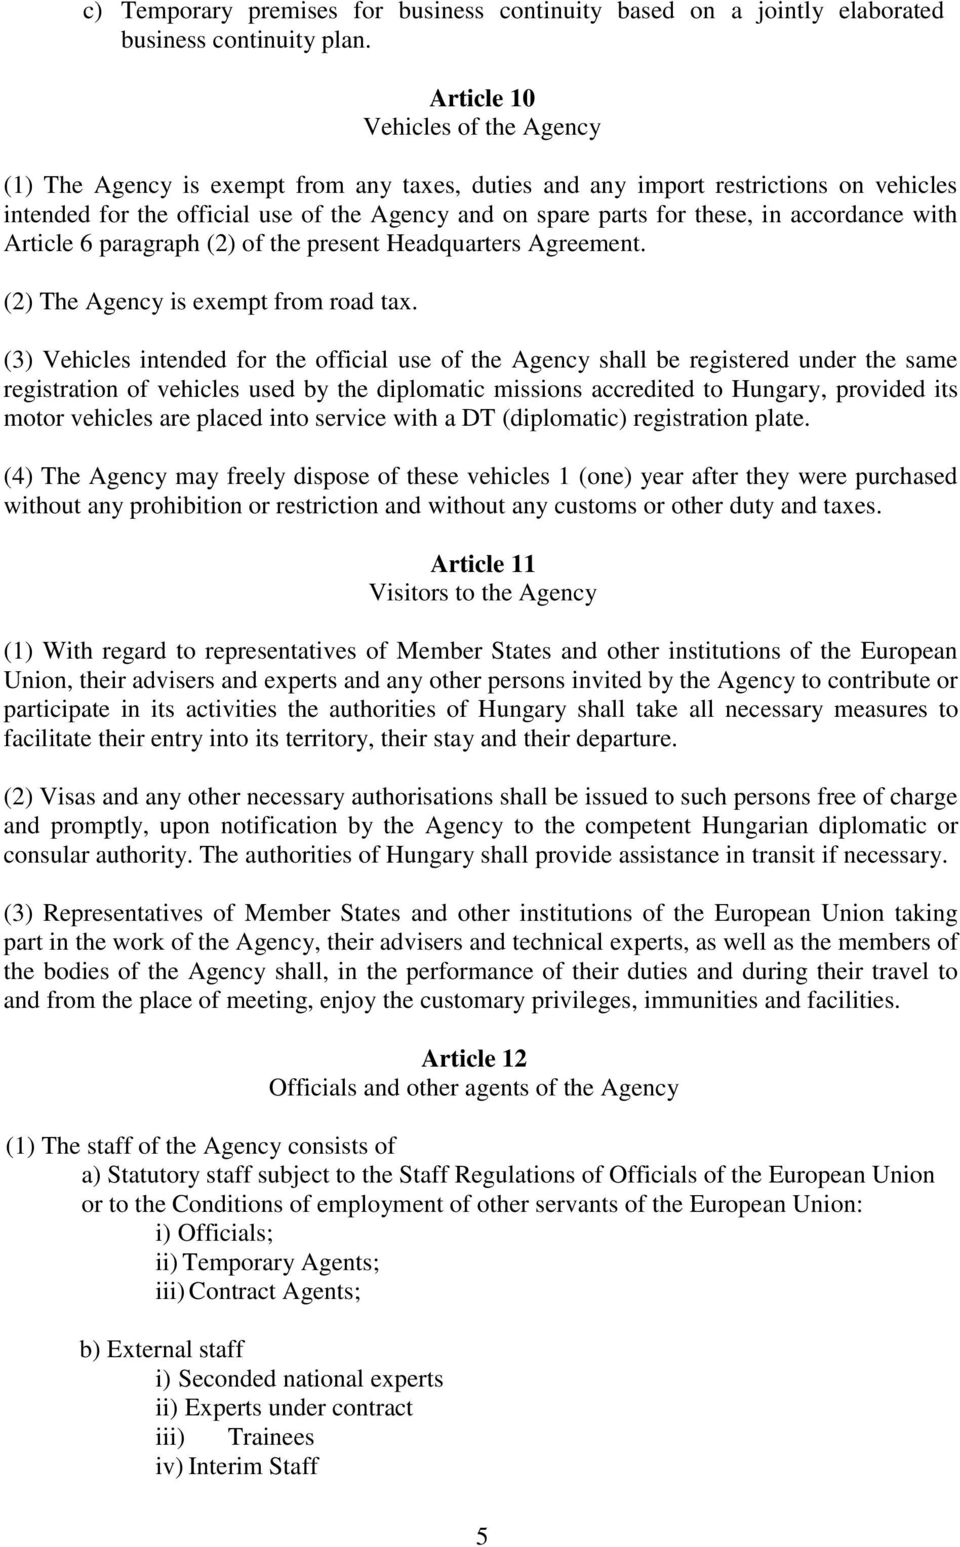 accordance with Article 6 paragraph (2) of the present Headquarters Agreement. (2) The Agency is exempt from road tax.